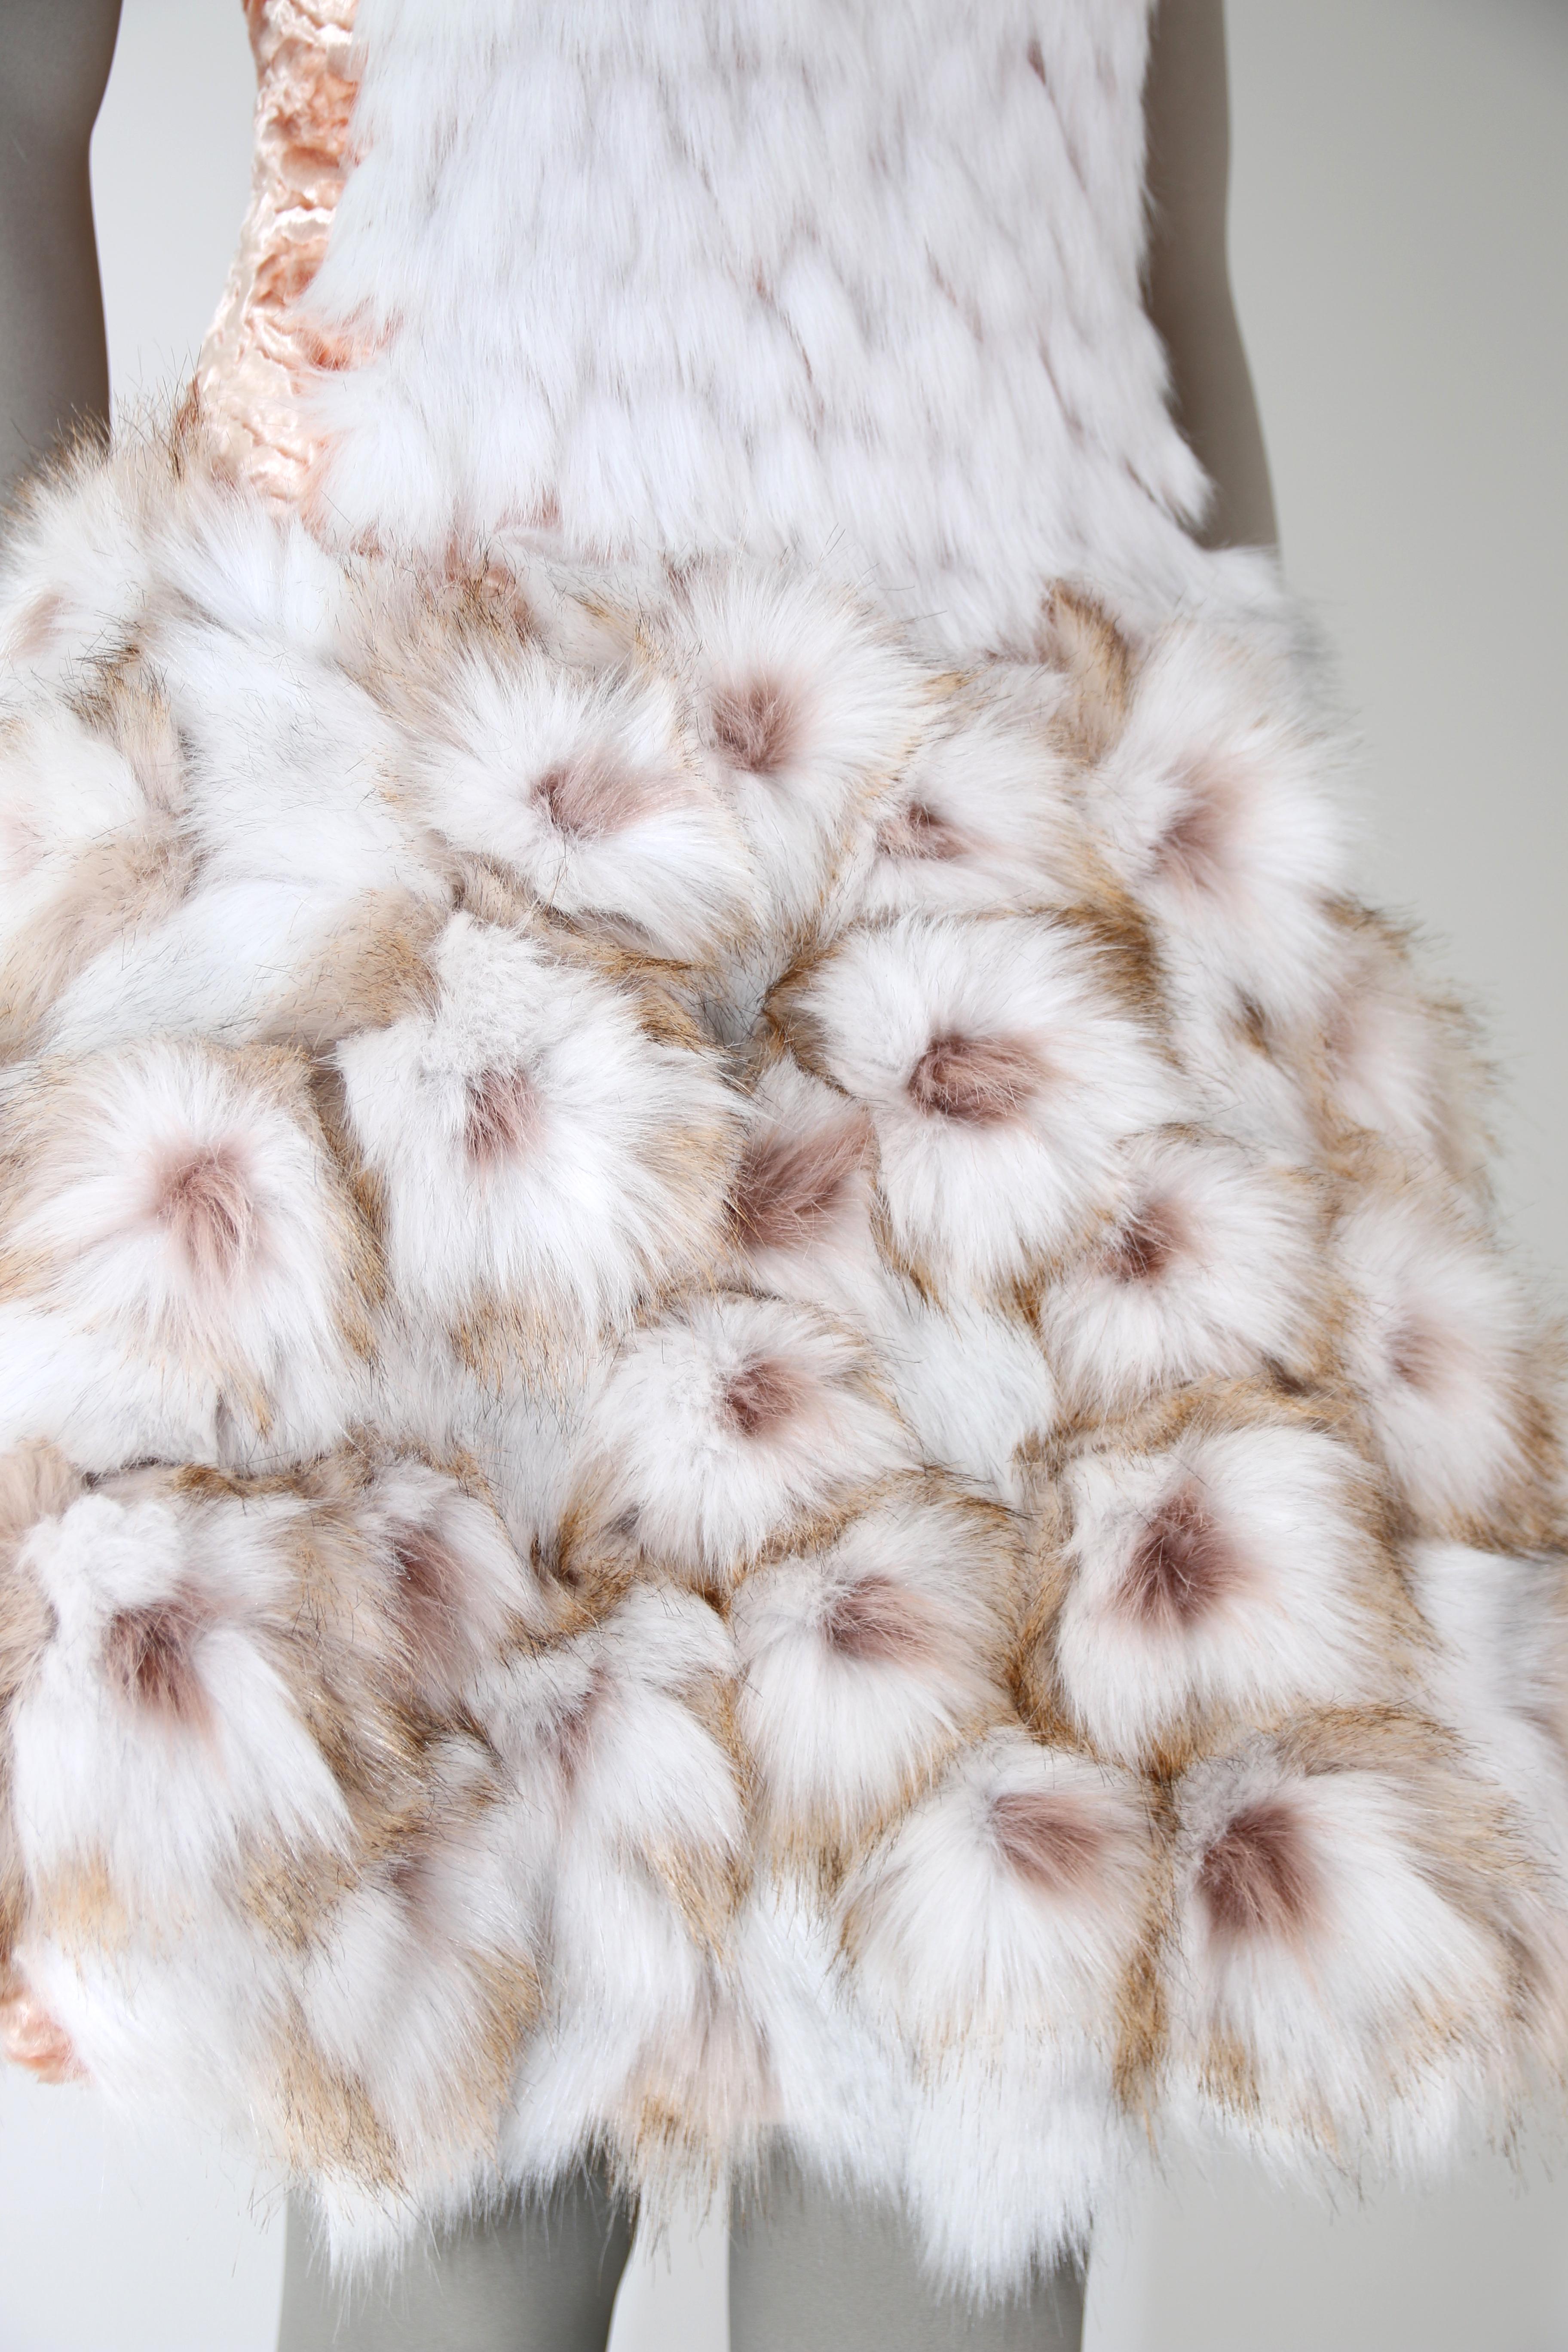 The Bianca Pelush white faux fur dress with three dimensional flowers is a one of a kind exclusive Couture piece. Featuring the highest quality man made pelage this extraordinary fur free dress is a beautiful replica of the chinchilla, fox and